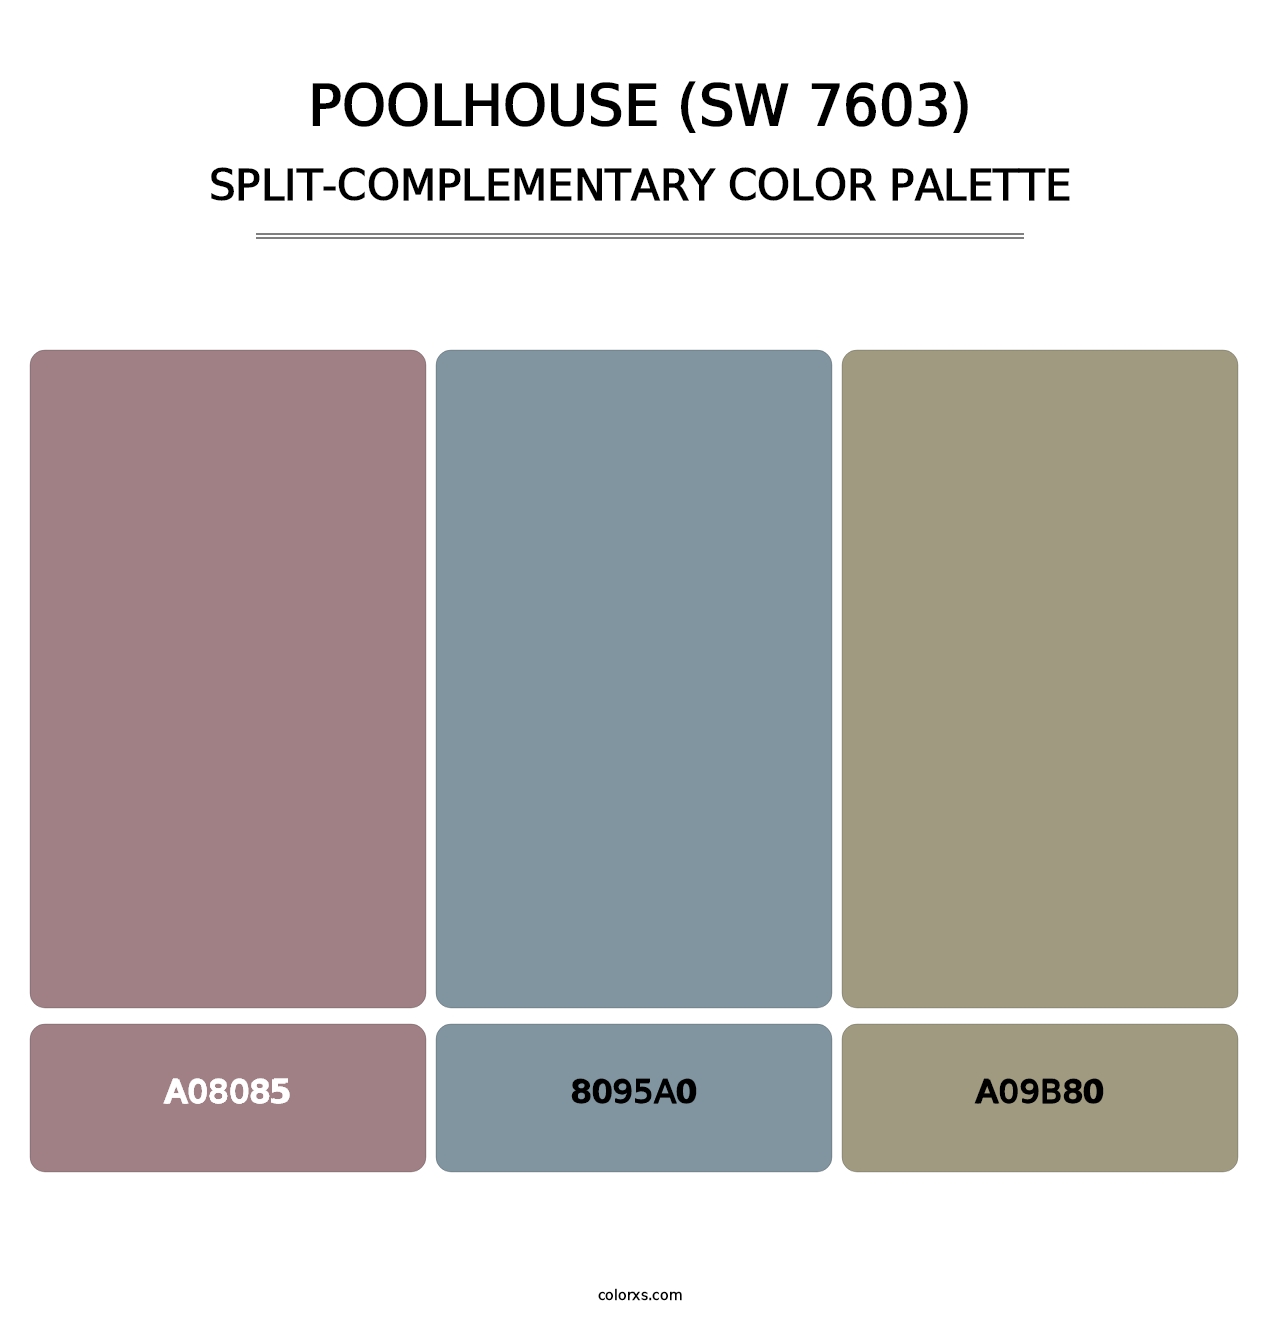 Poolhouse (SW 7603) - Split-Complementary Color Palette